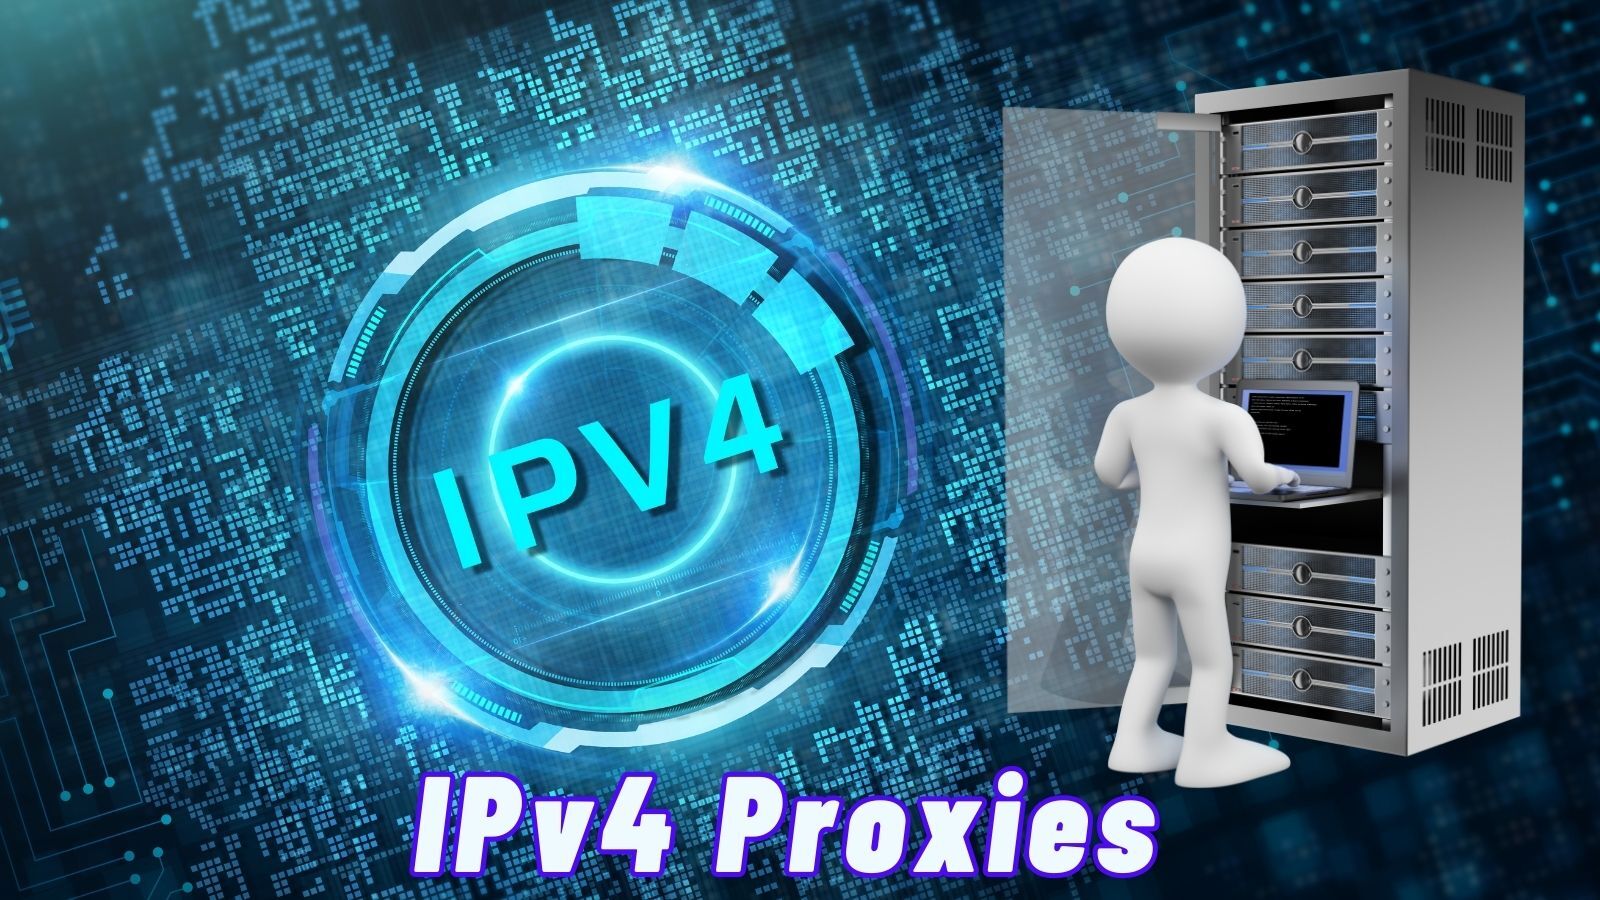 The Ultimate Guide to IPv4 Proxies 2023: Recommended IPv4 Proxy Choices